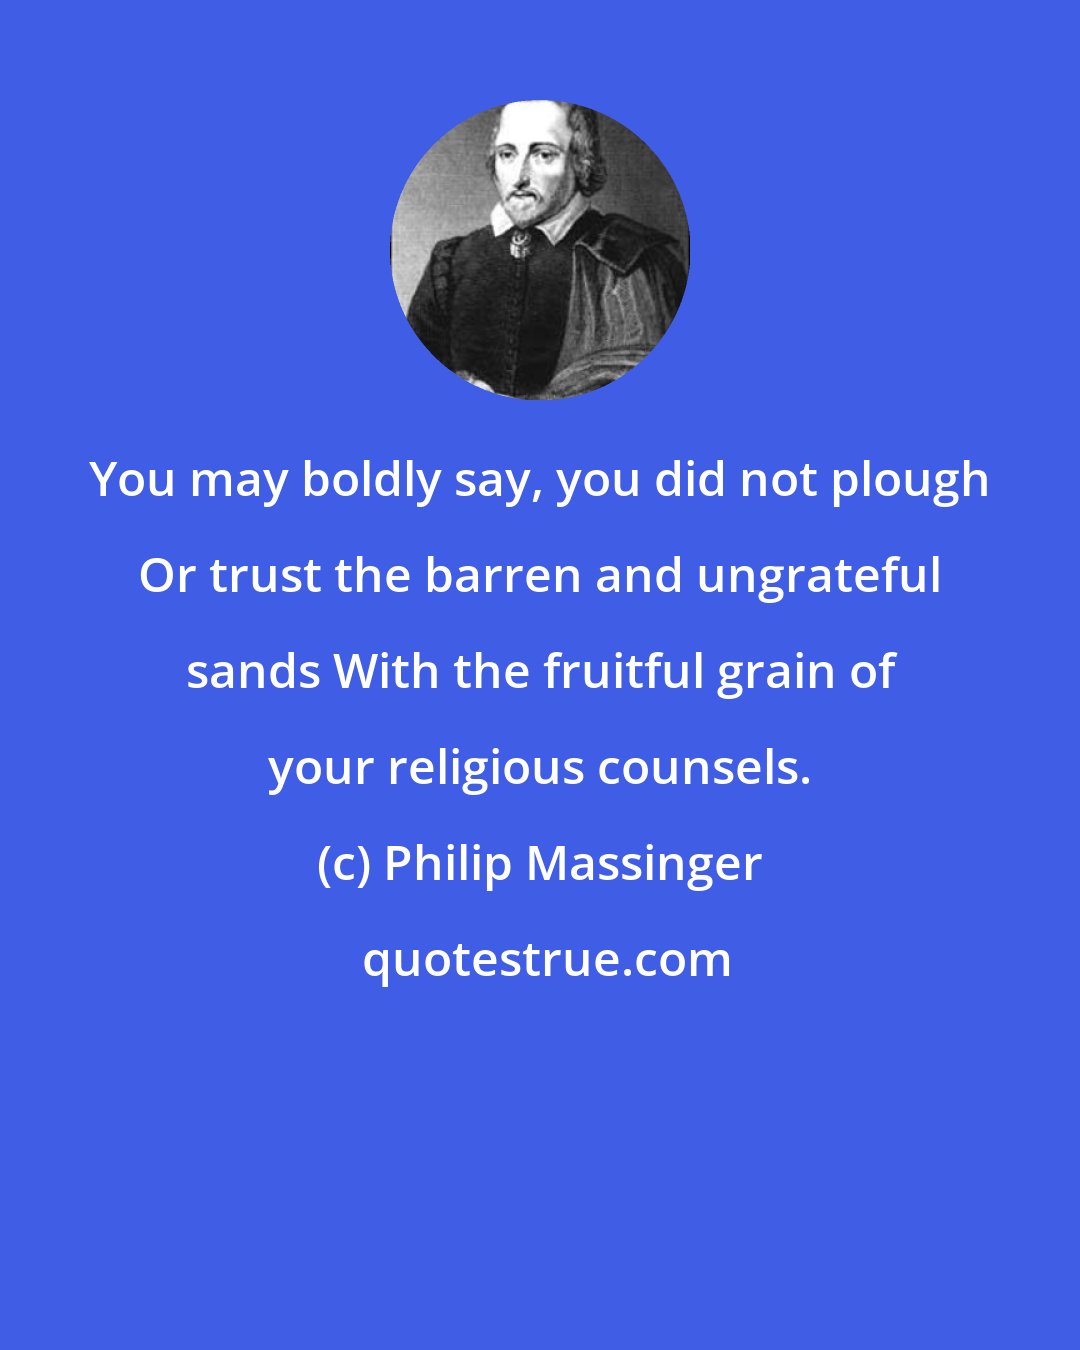 Philip Massinger: You may boldly say, you did not plough Or trust the barren and ungrateful sands With the fruitful grain of your religious counsels.